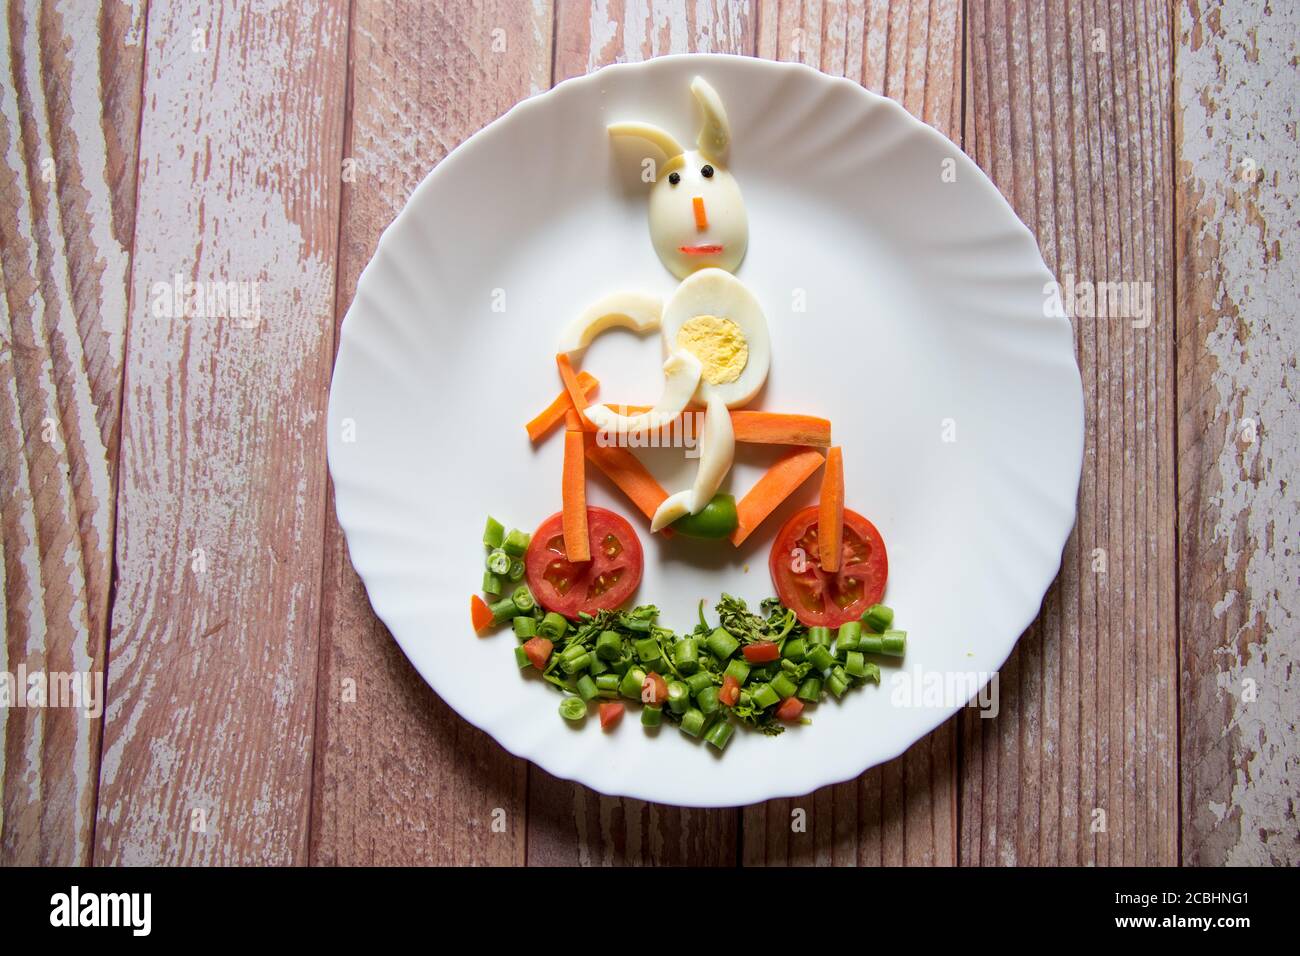 Food art breakfast in the shape of a  rabbit background Stock Photo